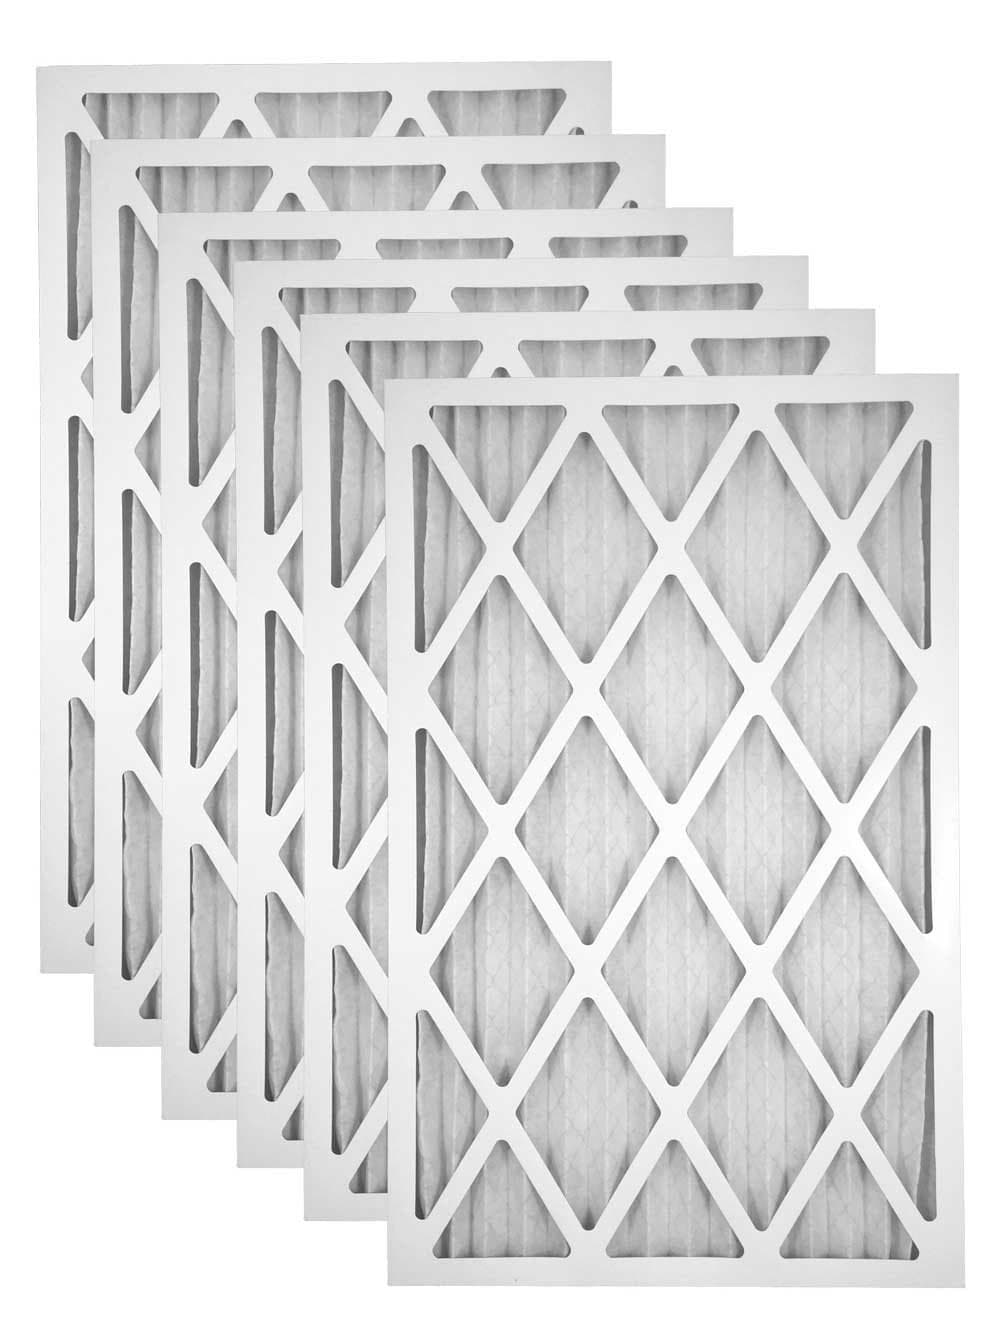 Atomic 20x24x2 MERV 8 Pleated Geothermal Furnace Filter - 6 Pack